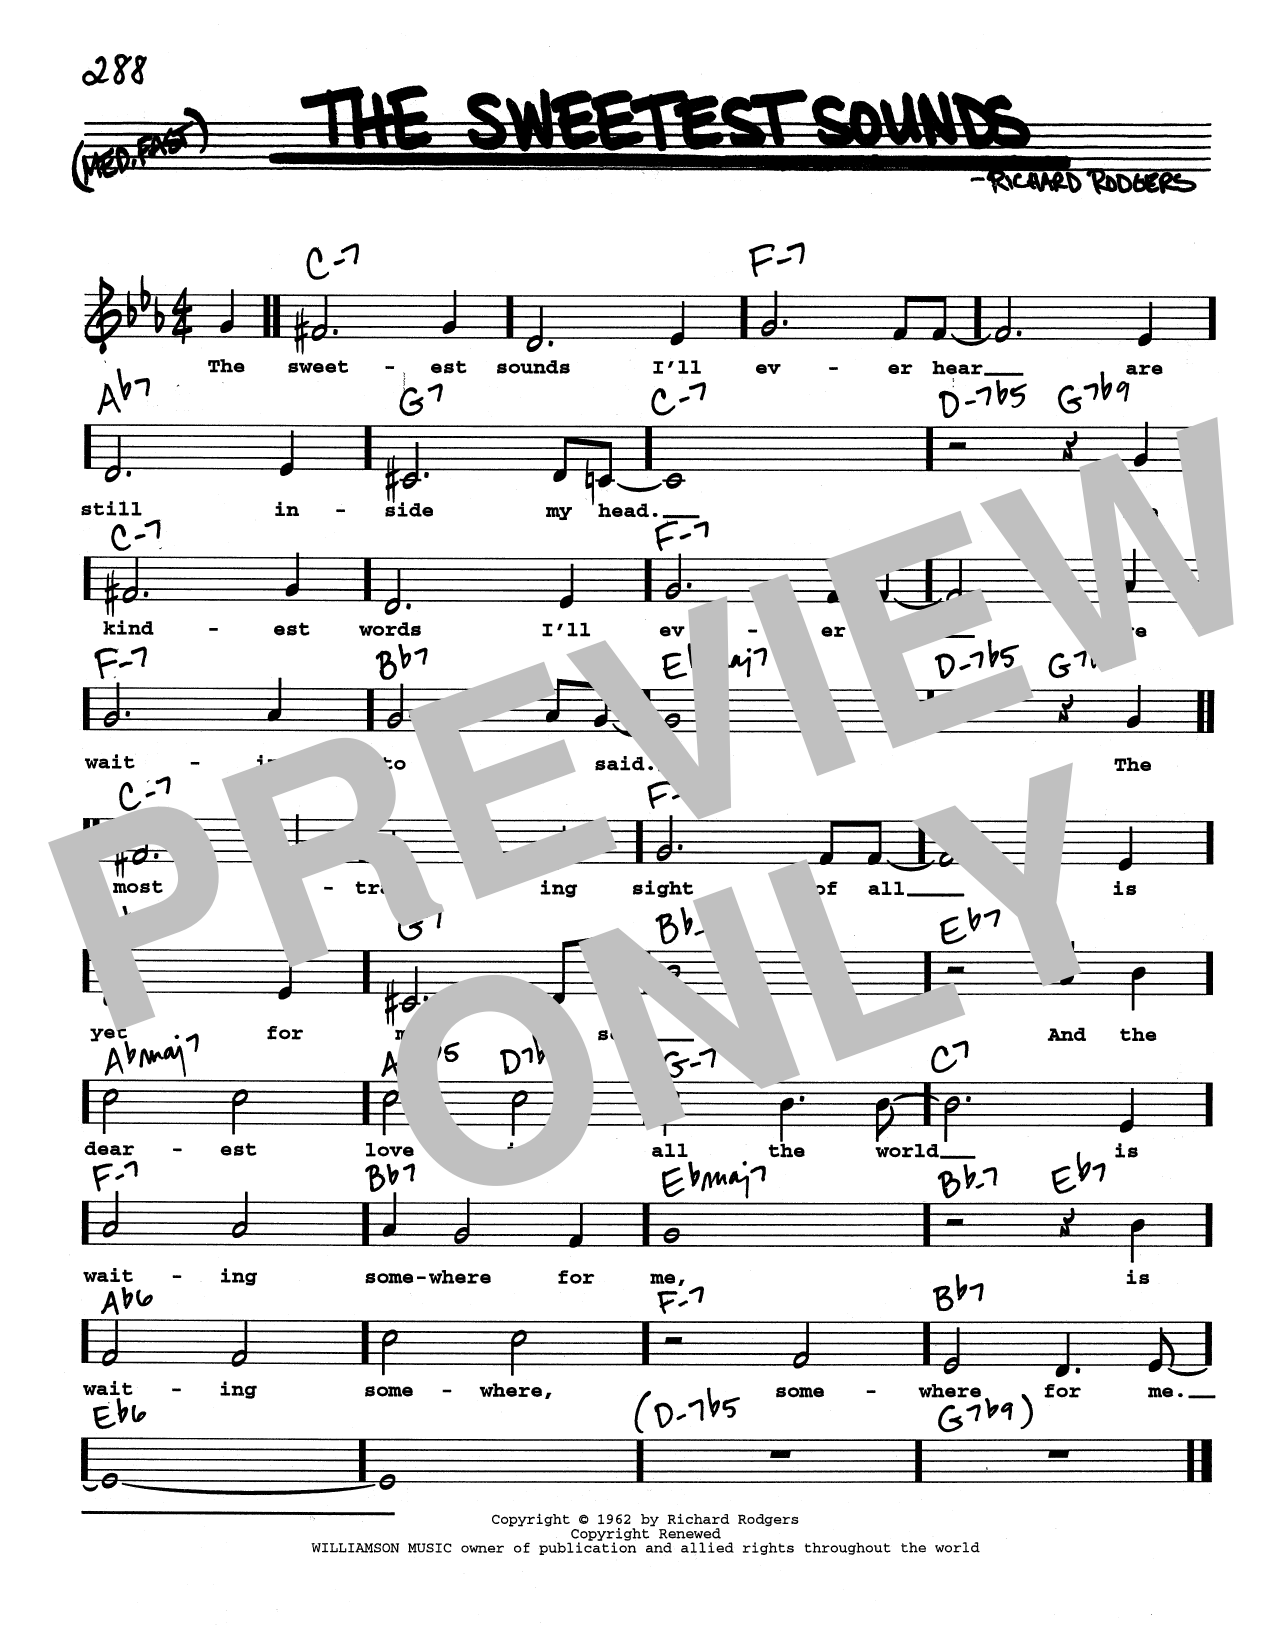 Richard Rodgers The Sweetest Sounds (Low Voice) sheet music notes printable PDF score